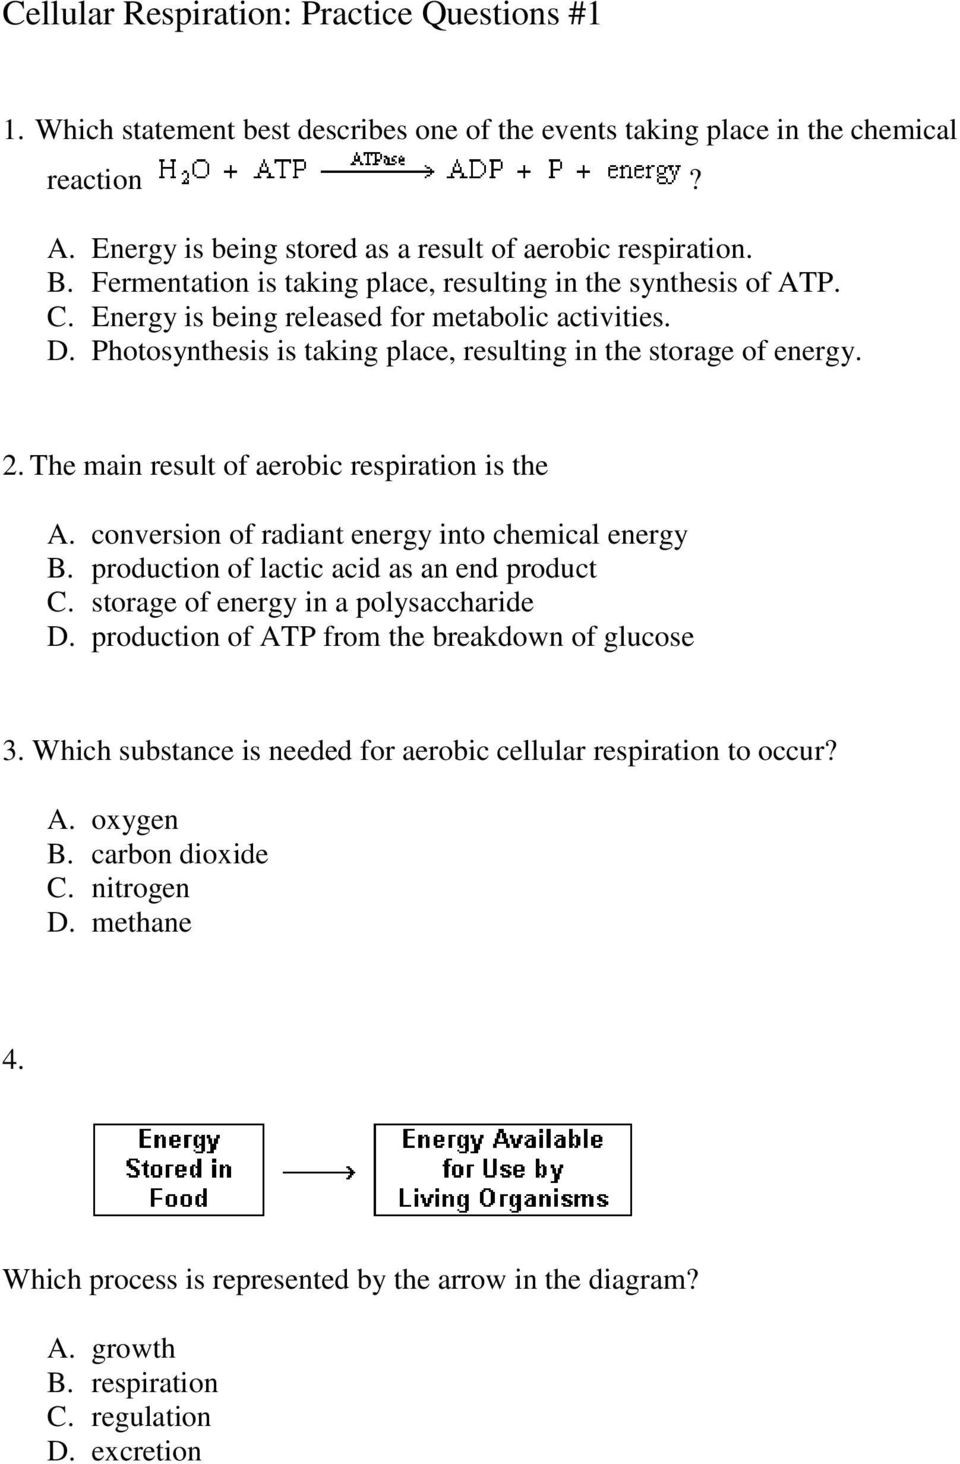 Cellular Respiration Worksheet Answer Key Cellular Respiration Practice Questions 1 Pdf Free Download